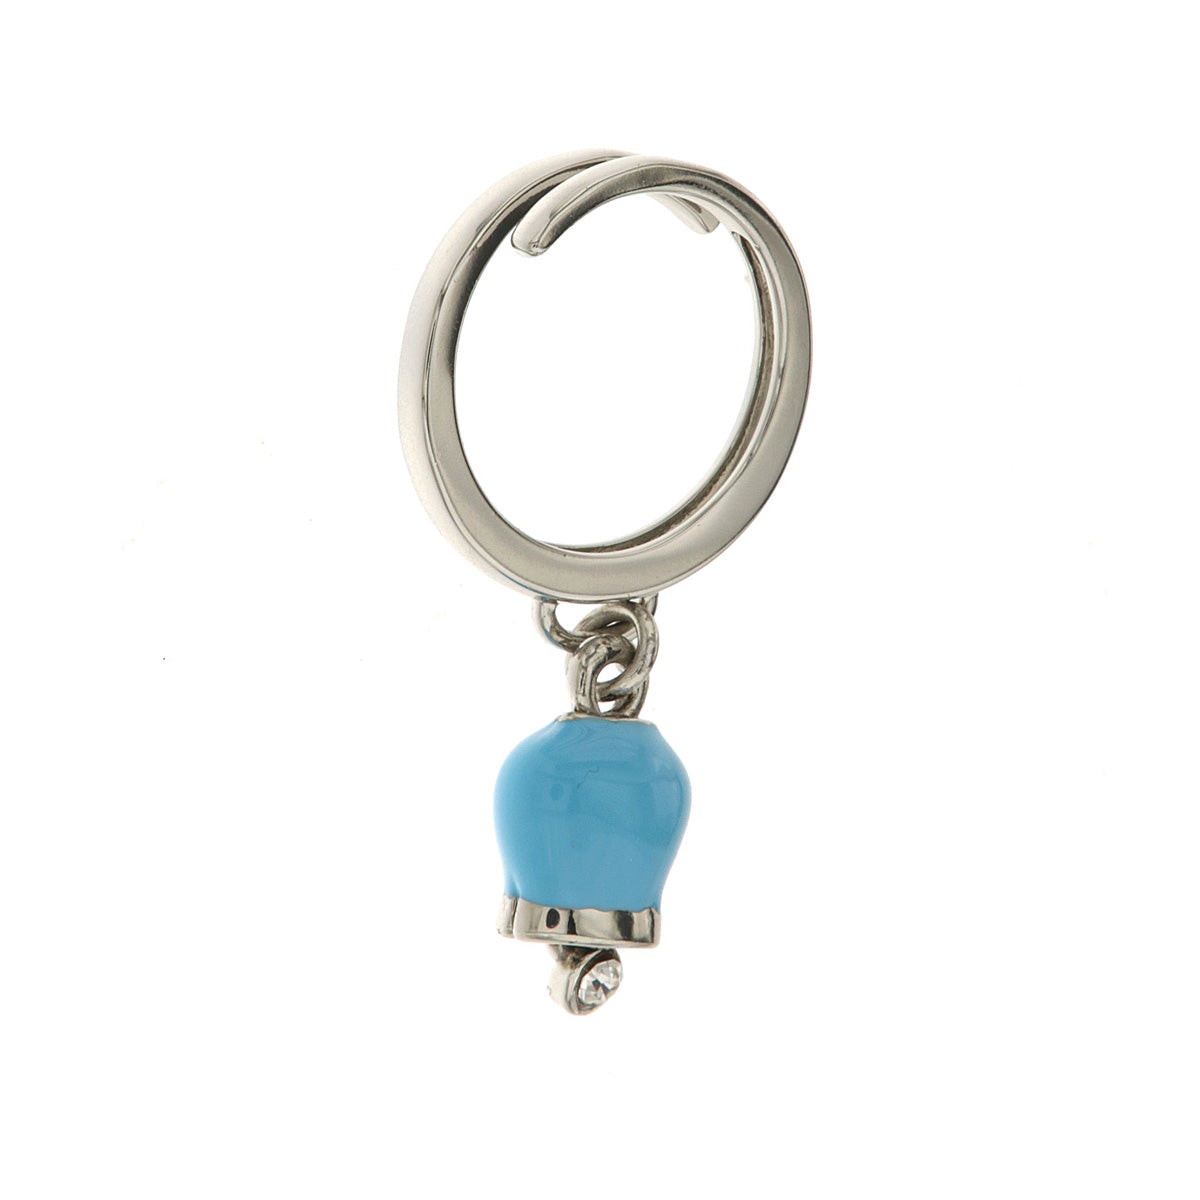 Metal ring with bell of blue pendant charm, embellished with light point